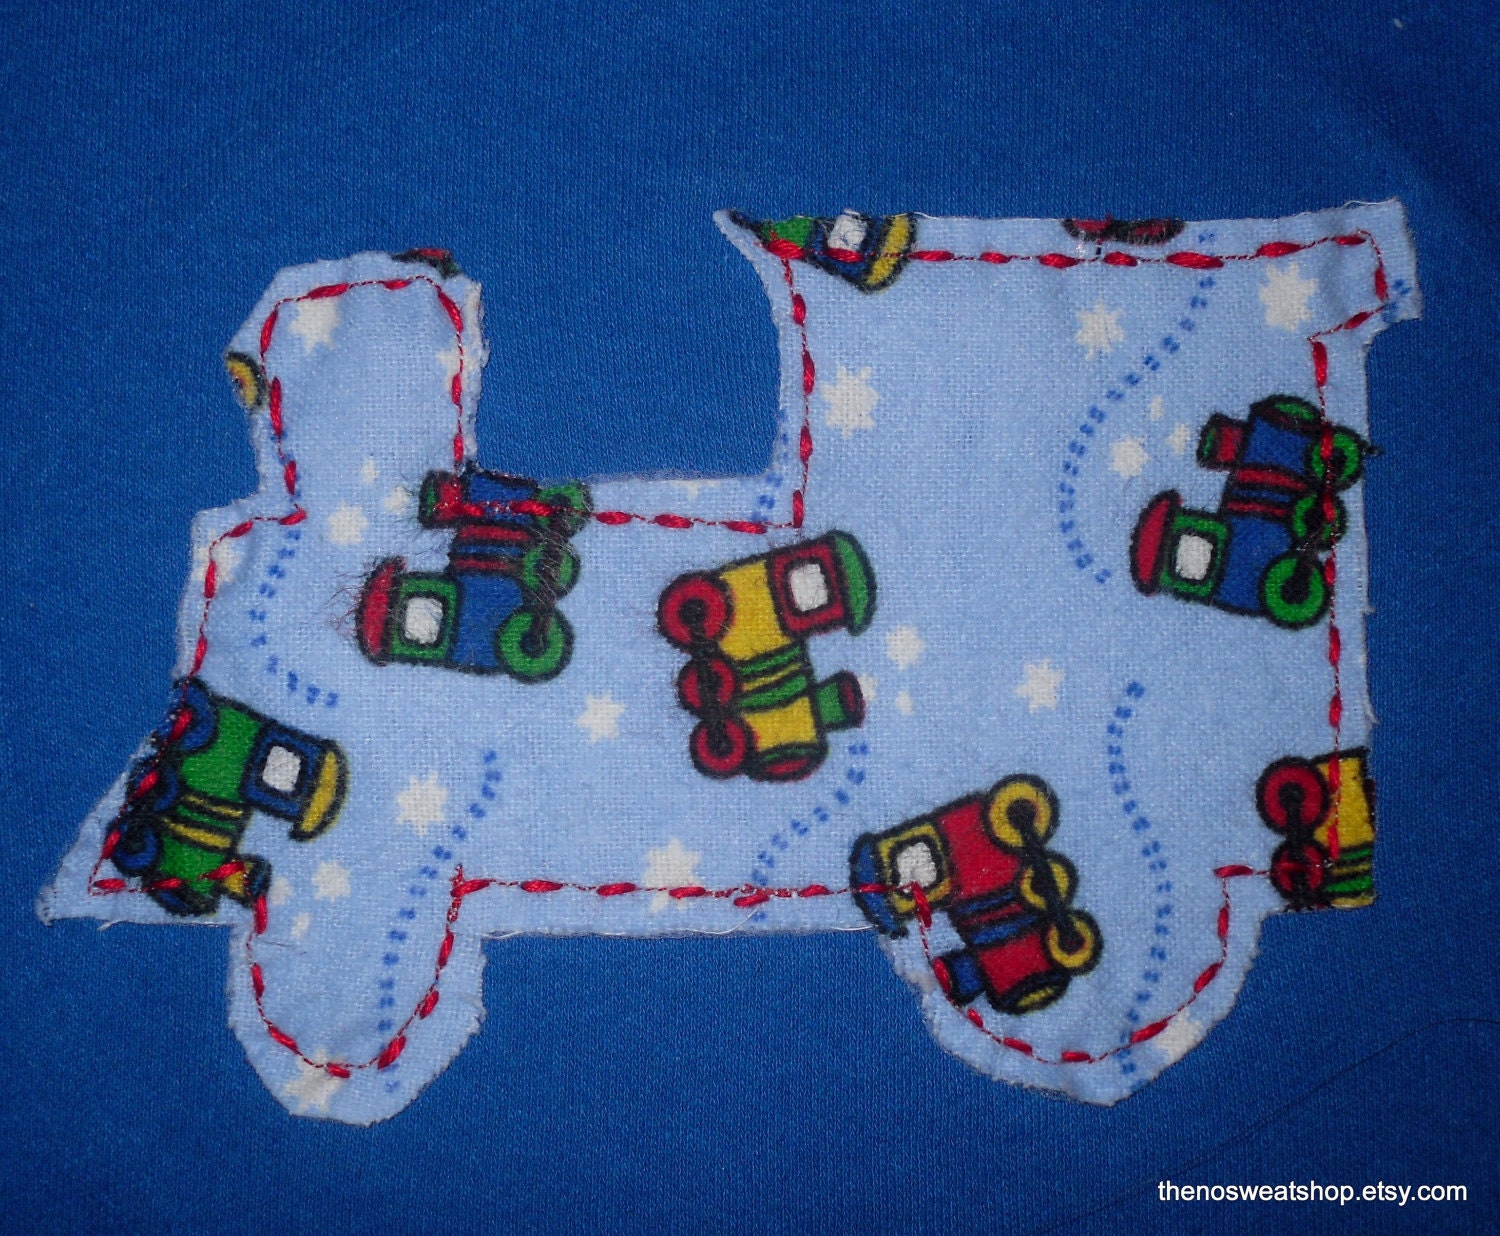 Flannel Pajamas featuring Trains Size 24 months